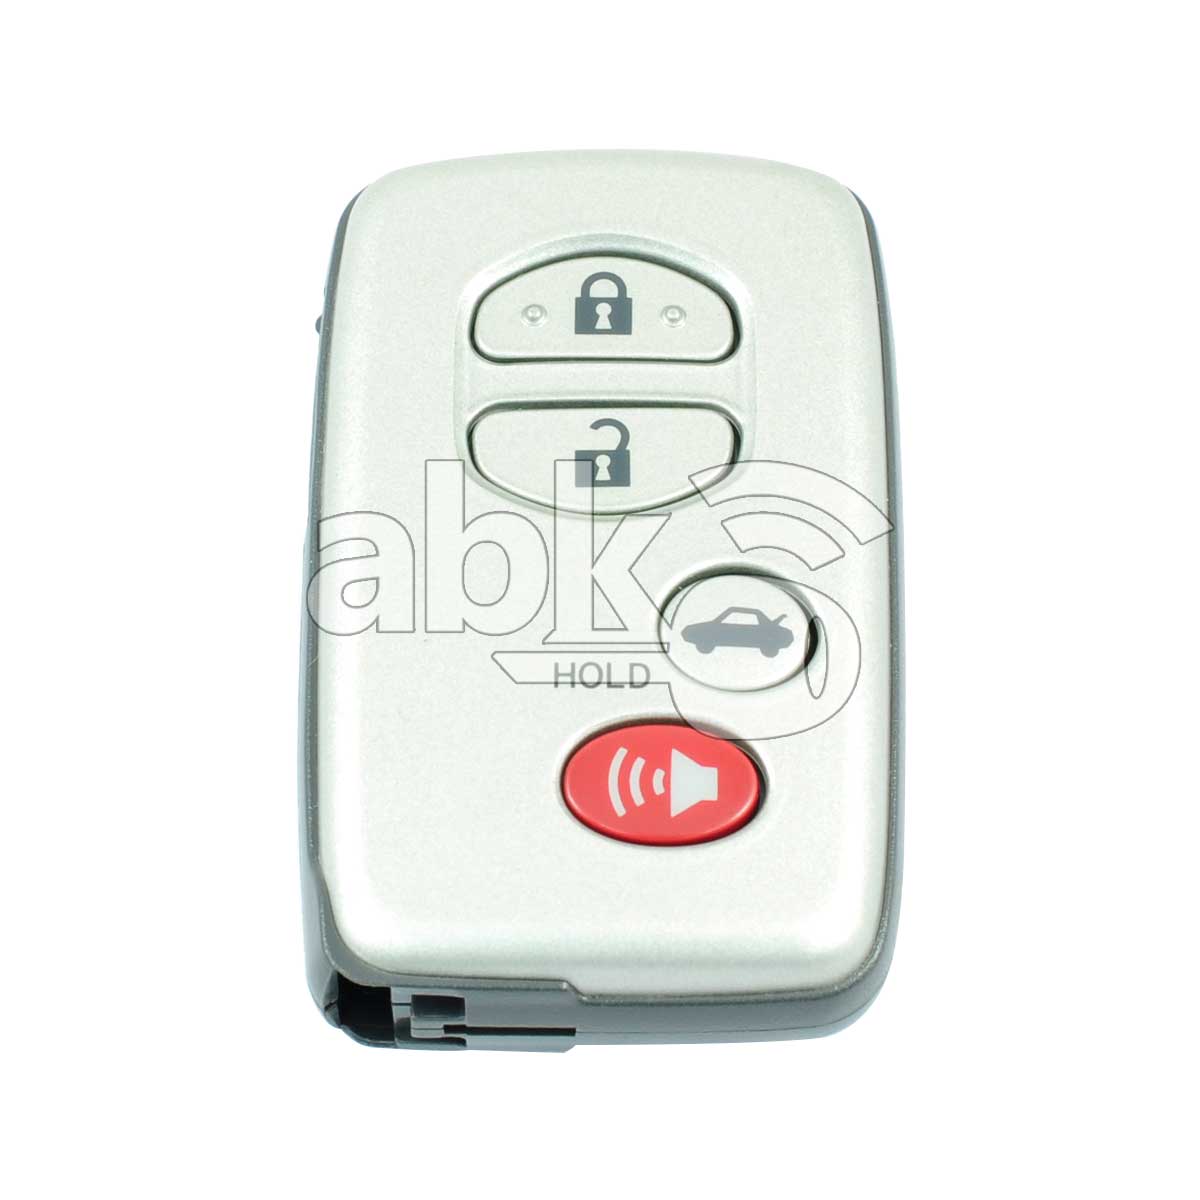 Genuine Toyota Camry Avalon 2007+ Smart Key 4Buttons 89904-06041 315MHz HYQ14AAB P1 D4 - ABK-386 -